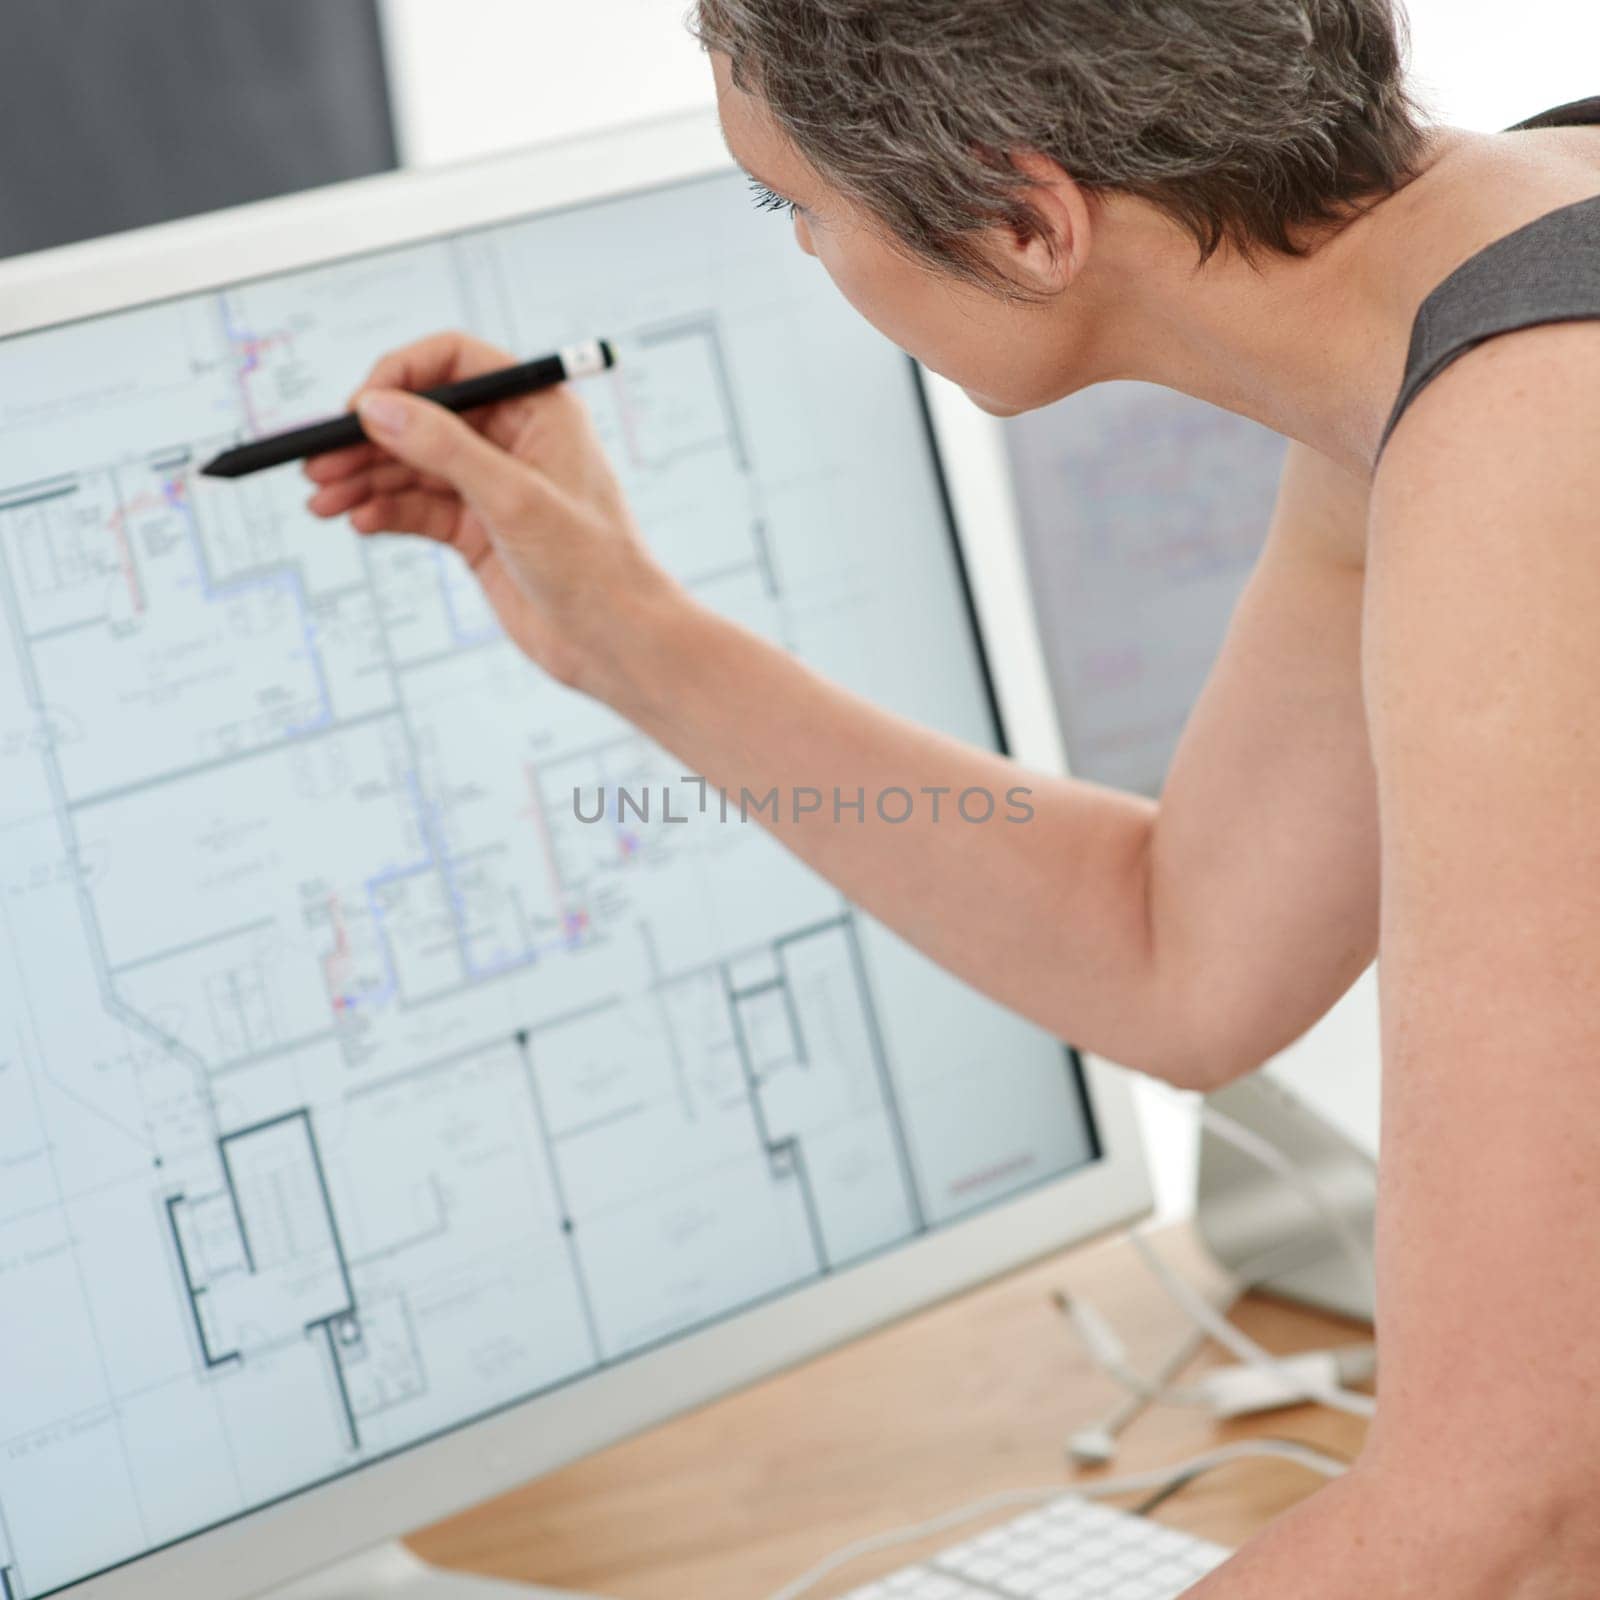 Utilizing modern technology to draw up building plans. A mature female architect working on building plans on her touchscreen computer